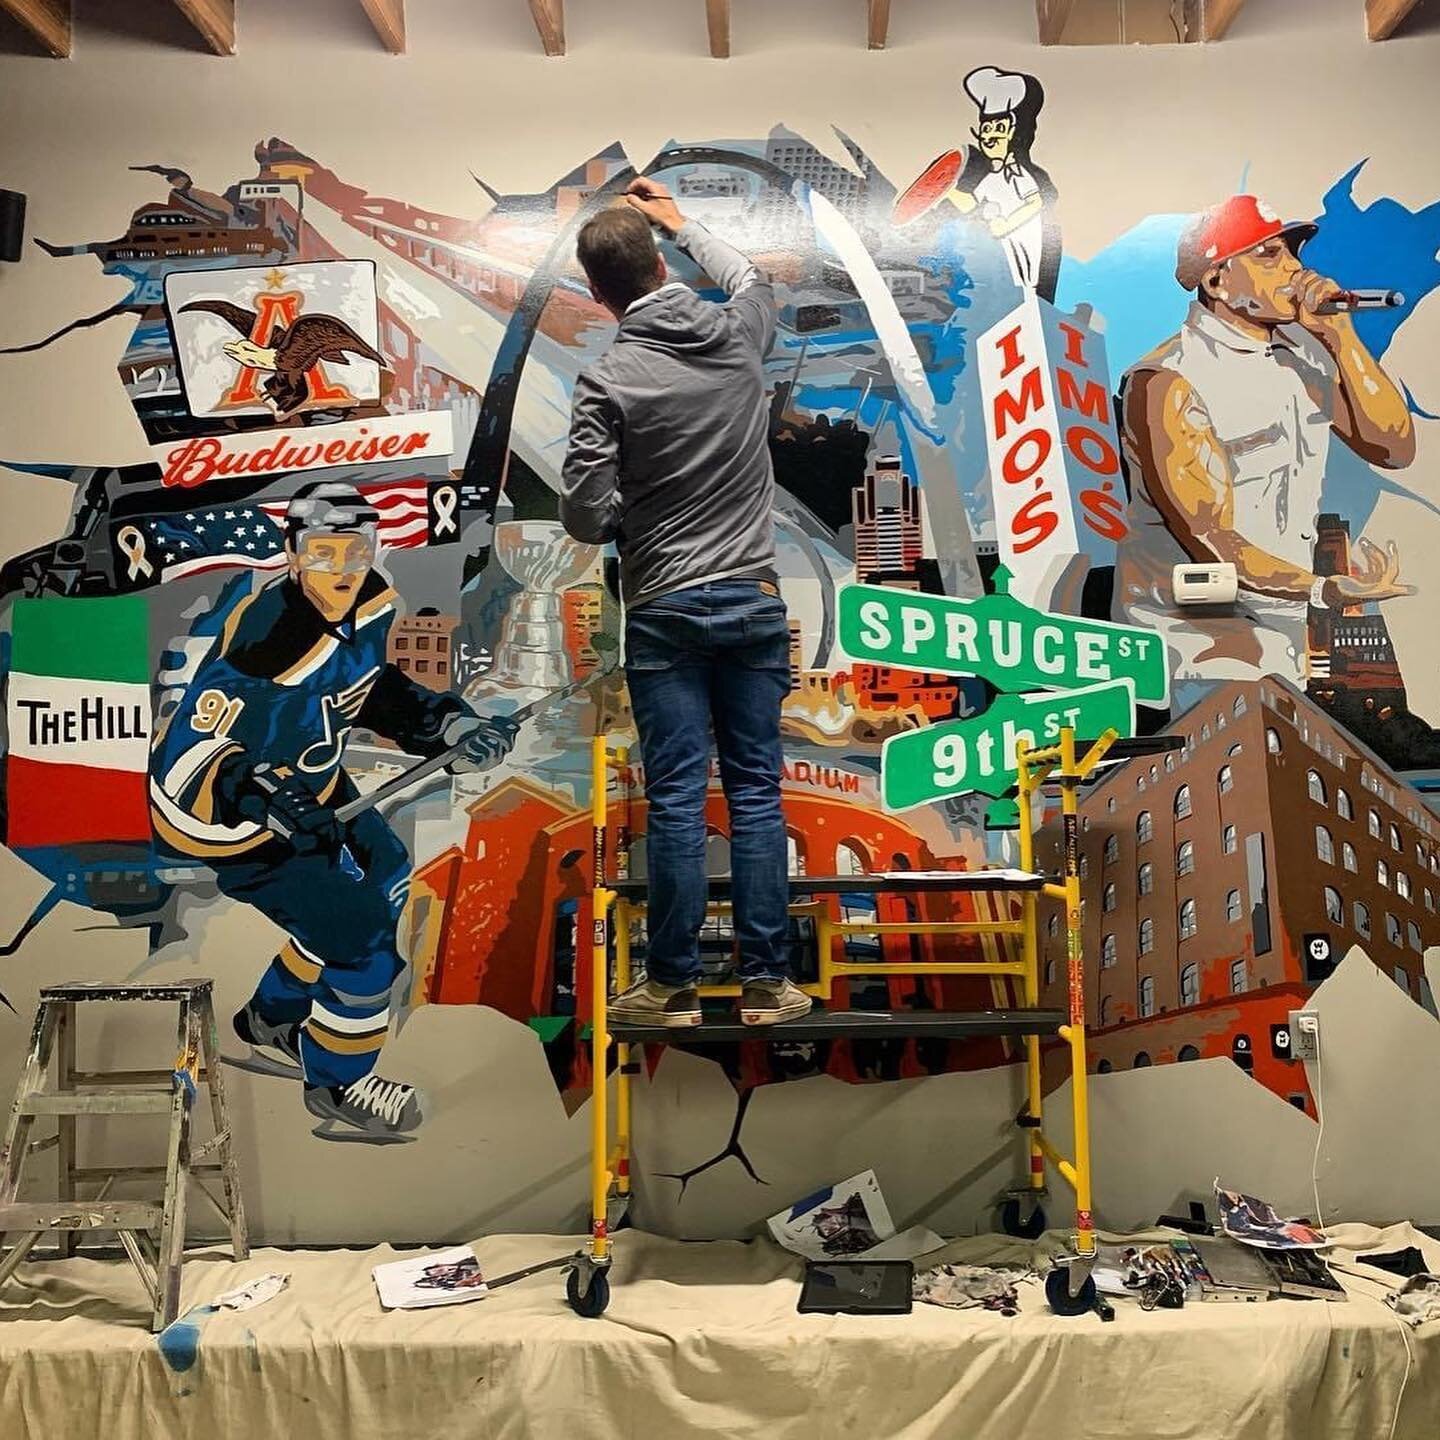 Spent the week over at @thehaven_stl painting a mural commissioned by @ericbeisel Thanks to @romeo_foreal @topcoat_ev @salty_bananapants  for lending a brush hand and @kylelewsader for help with the design! 

#stlouissignandmural #handpainted #mural 